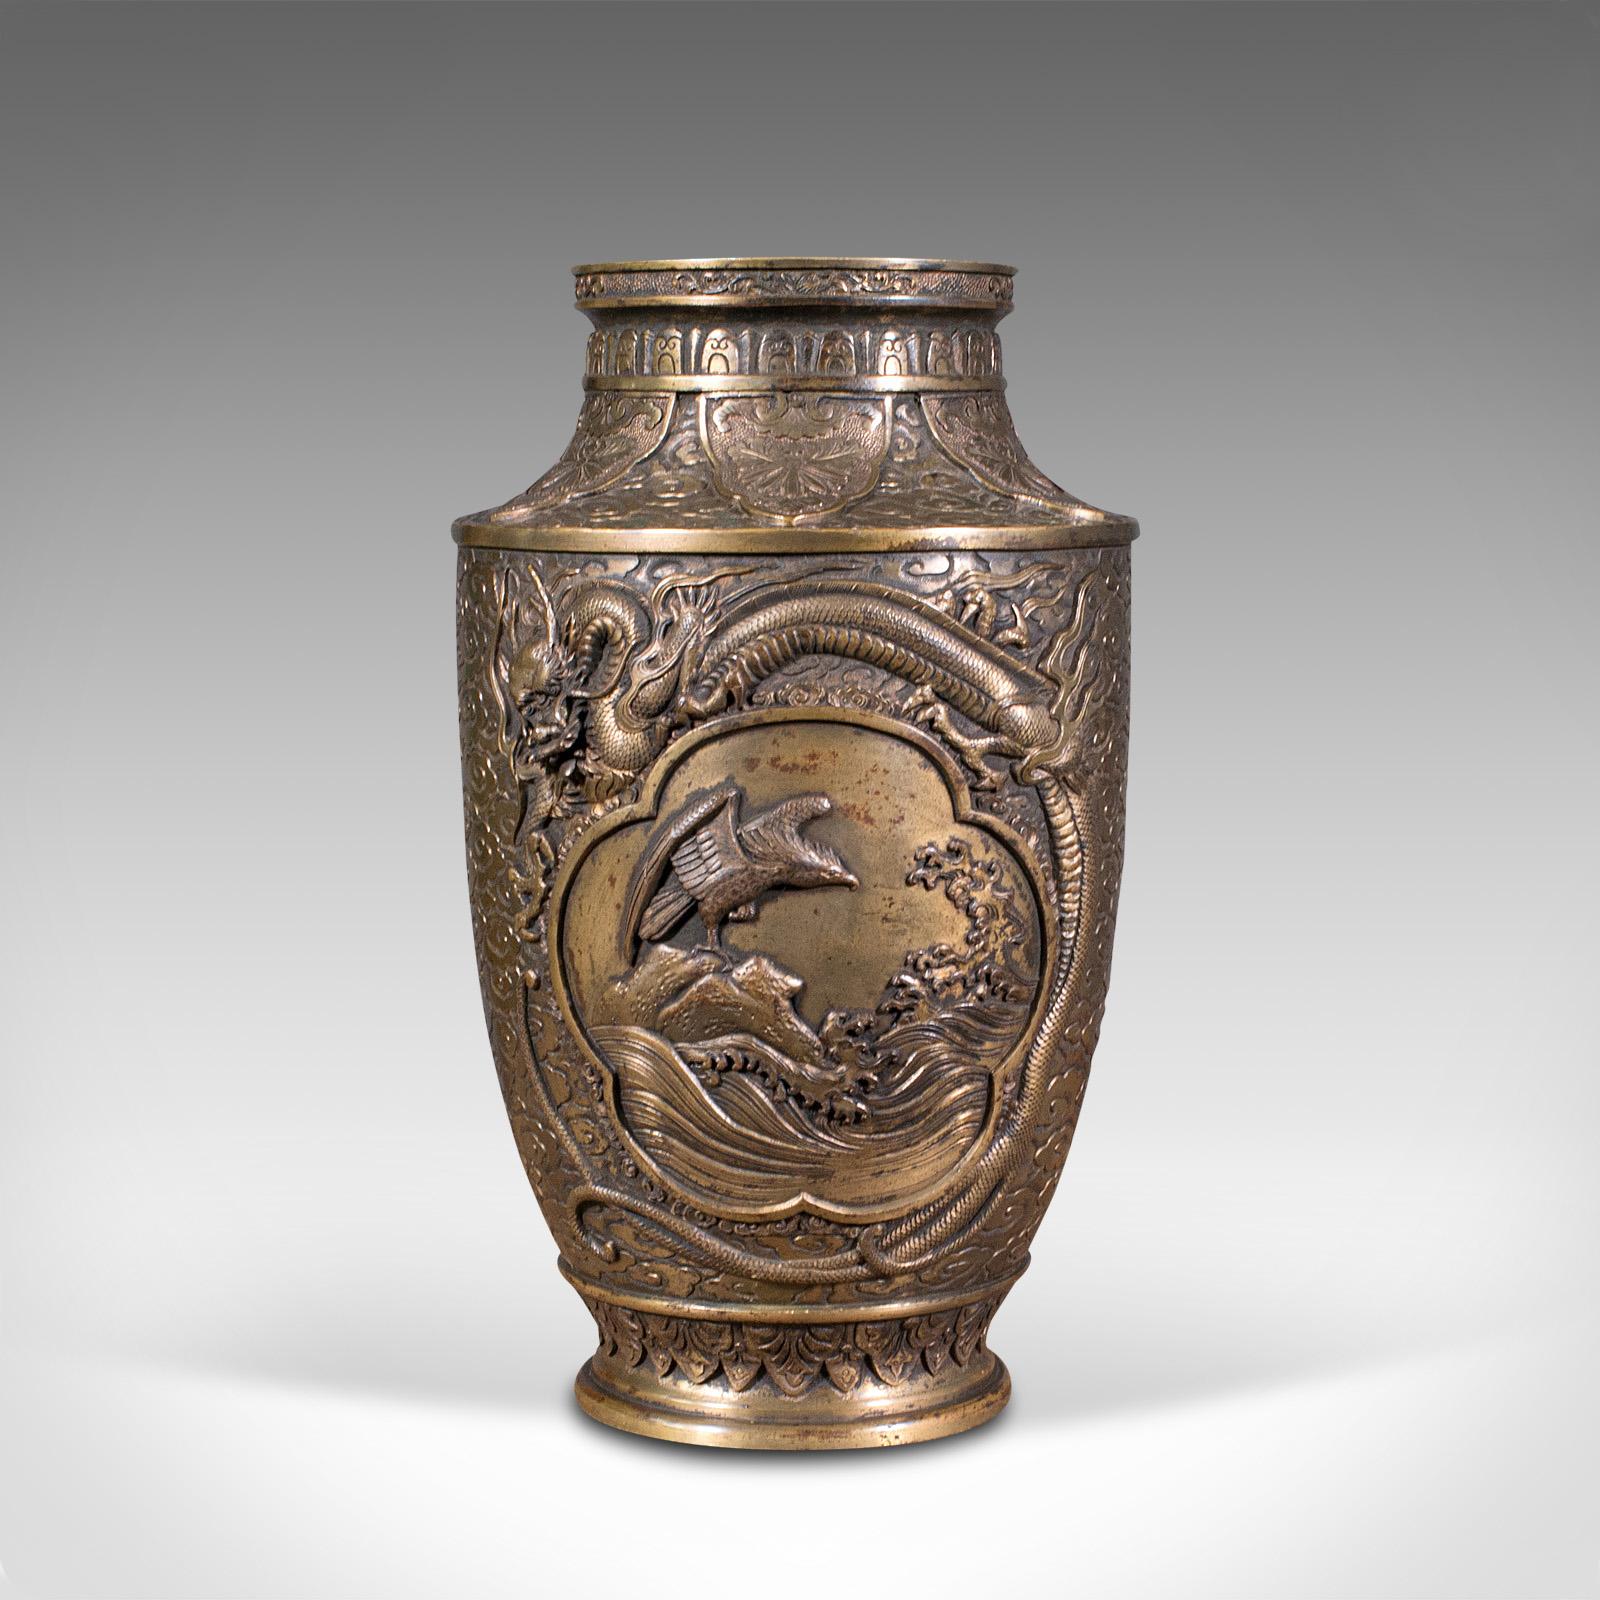 This is a large antique decorative vase. A Japanese, bronze Meiji period urn, dating to the late Victorian period, circa 1900.

Highly impressive antique vase with striking detail
Displays a desirable aged patina by way of fine weathering
Bronze